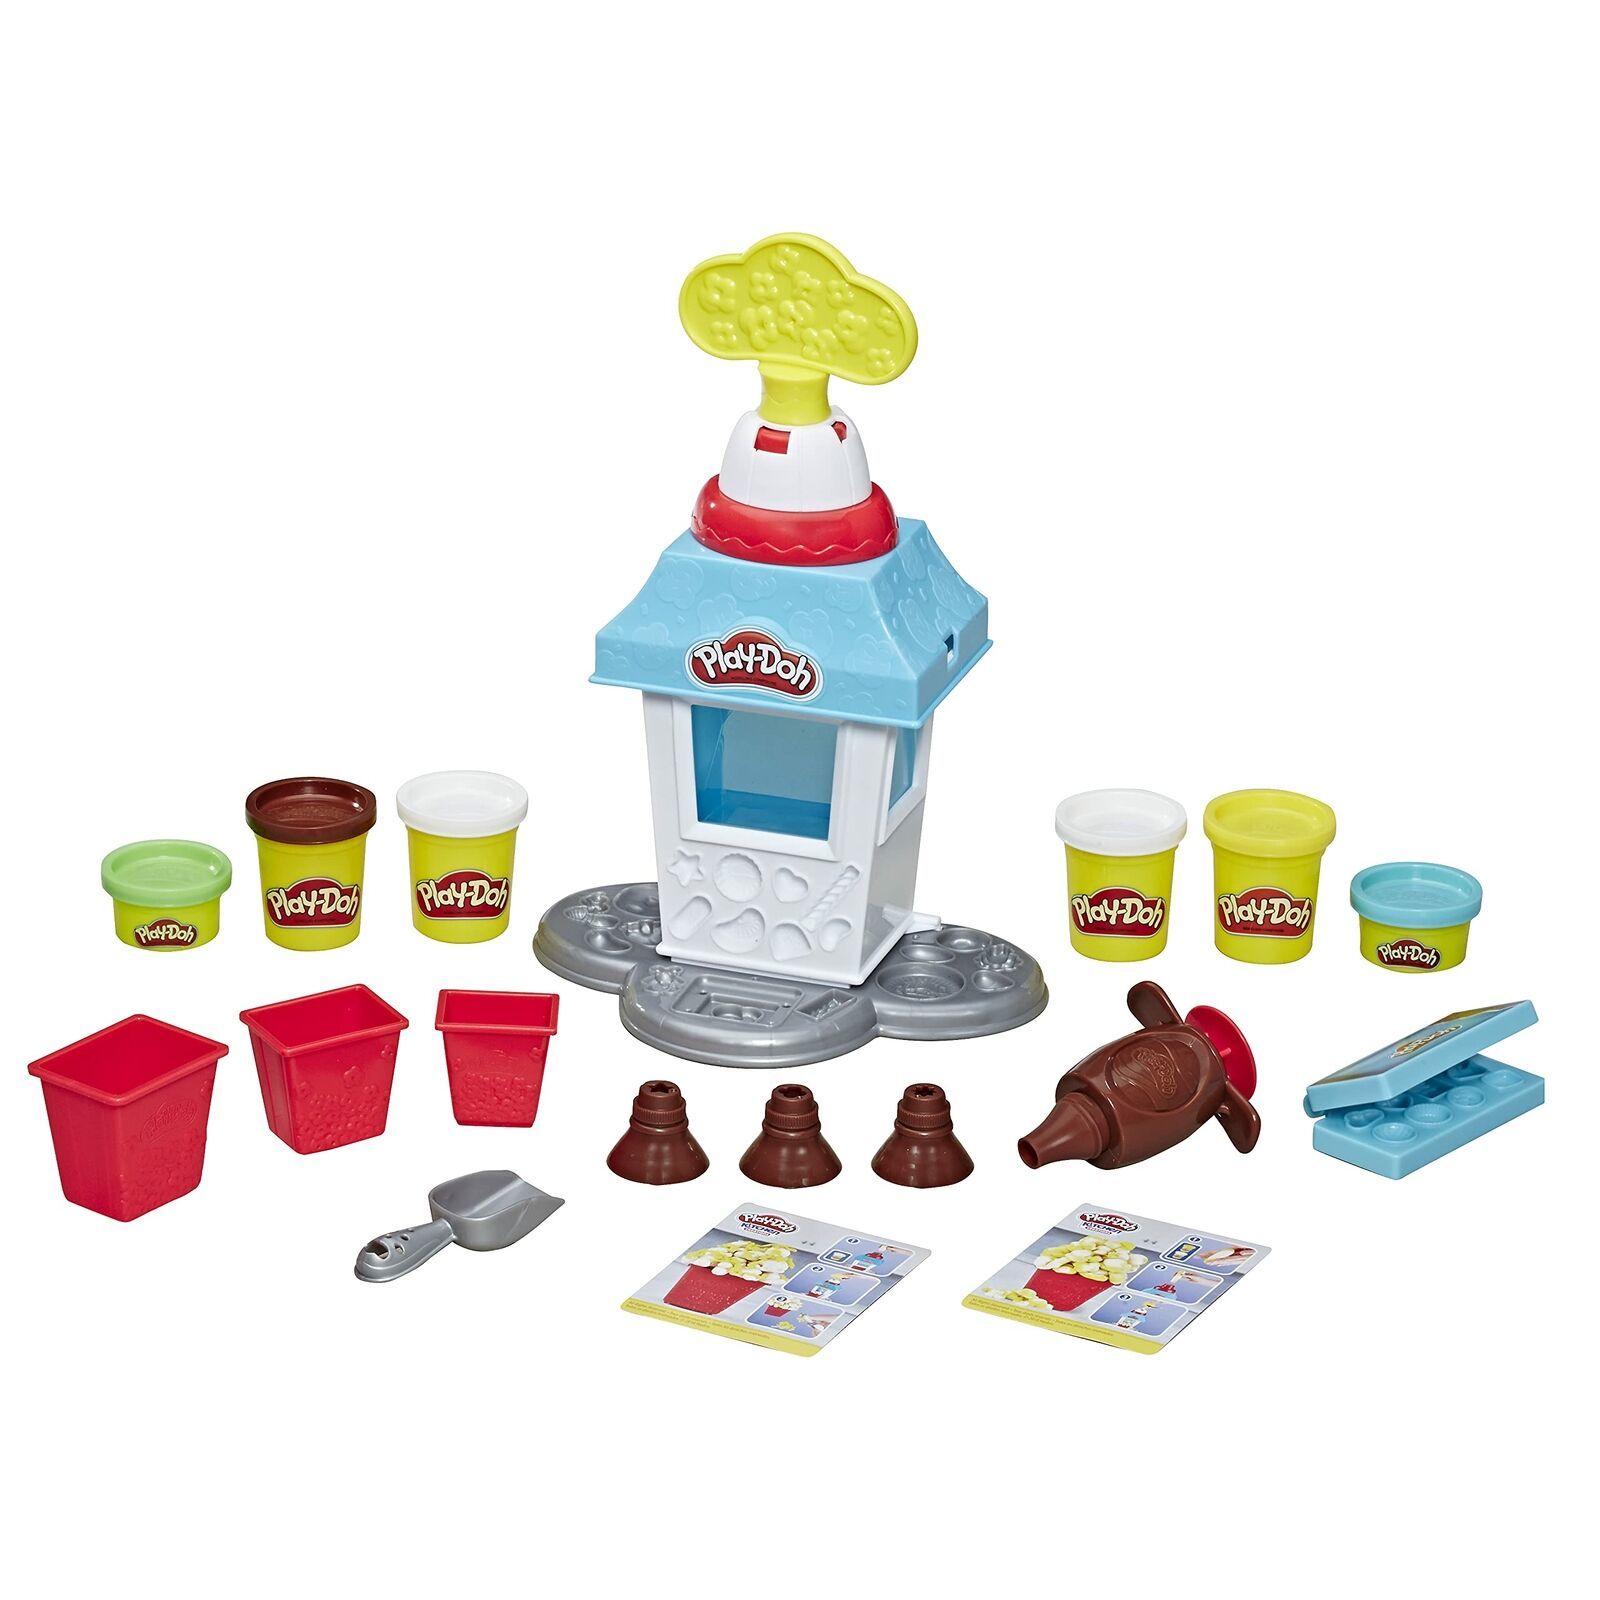 Play-Doh Kitchen Creations Popcorn Party Play Food Set with 6 Non-Toxic Cans